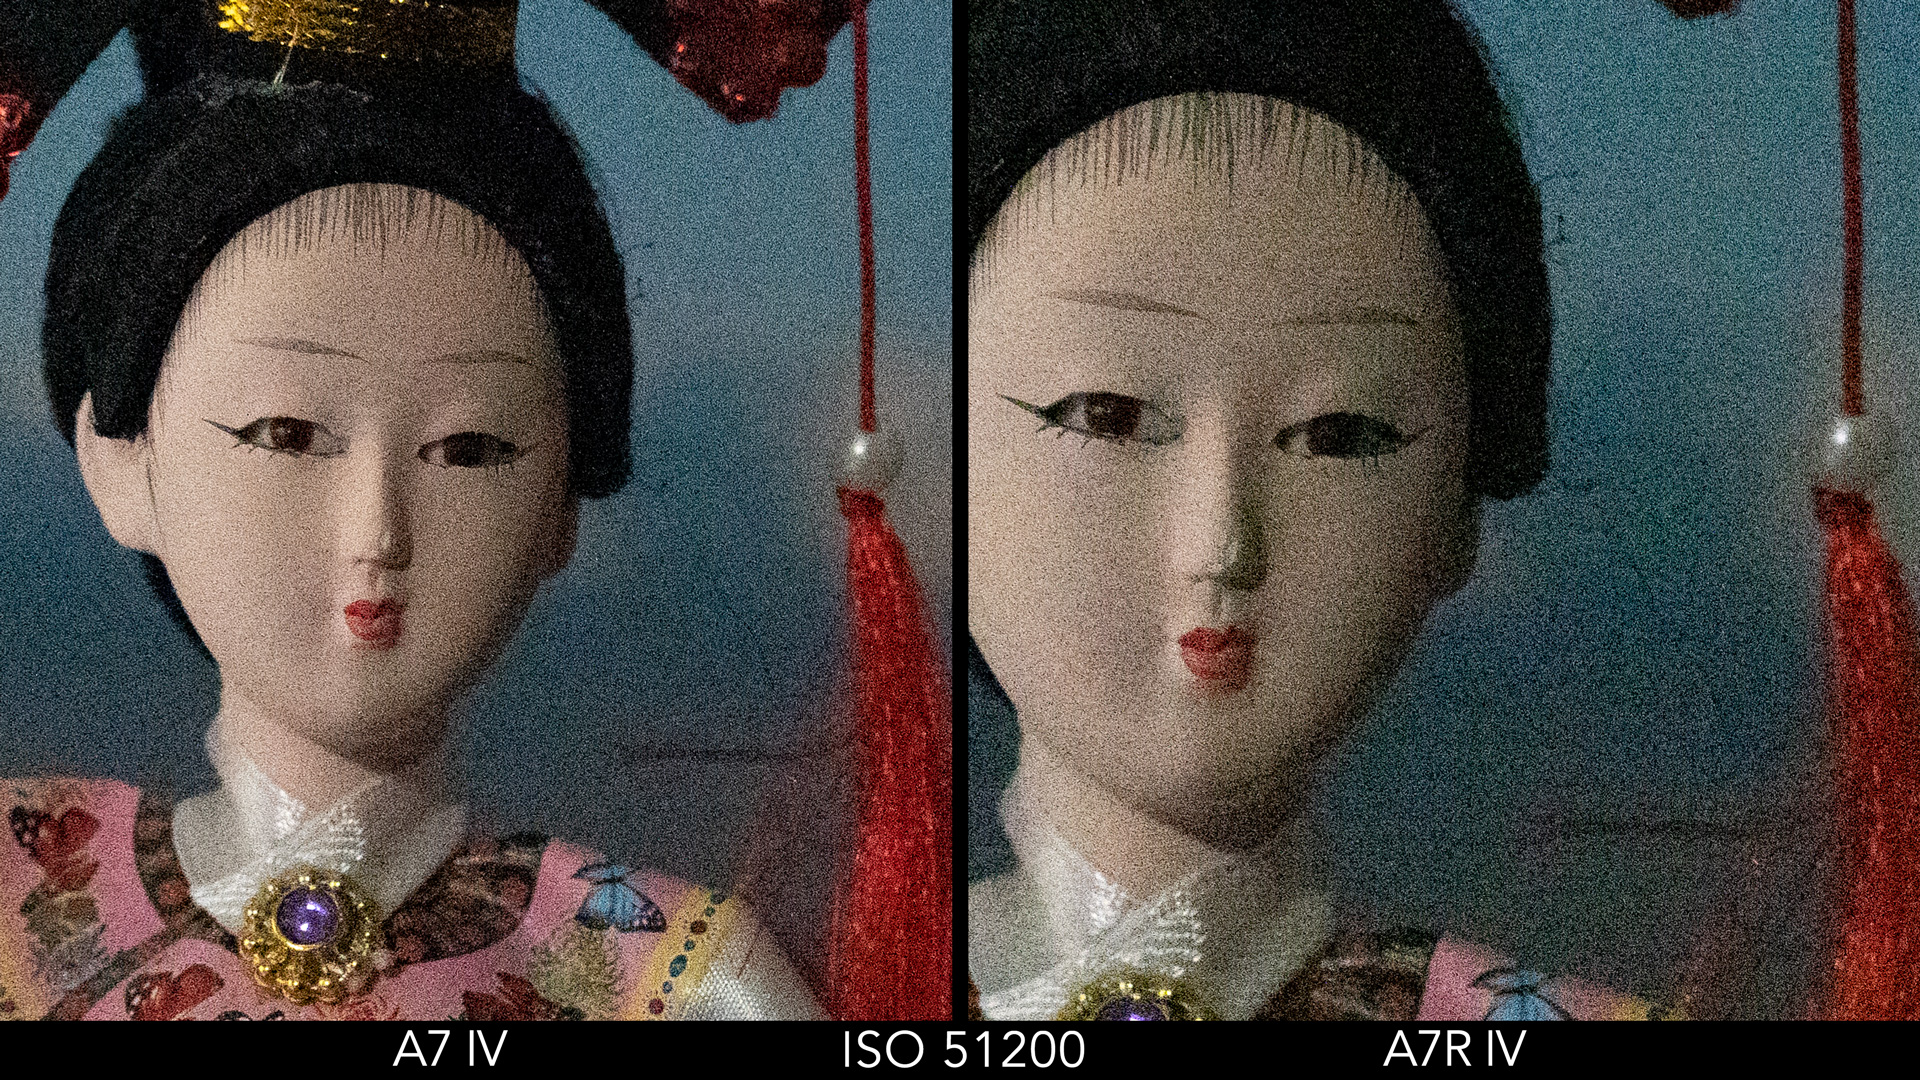 Side by side crop showing the quality at ISO 51200 for the A7 IV and A7R IV